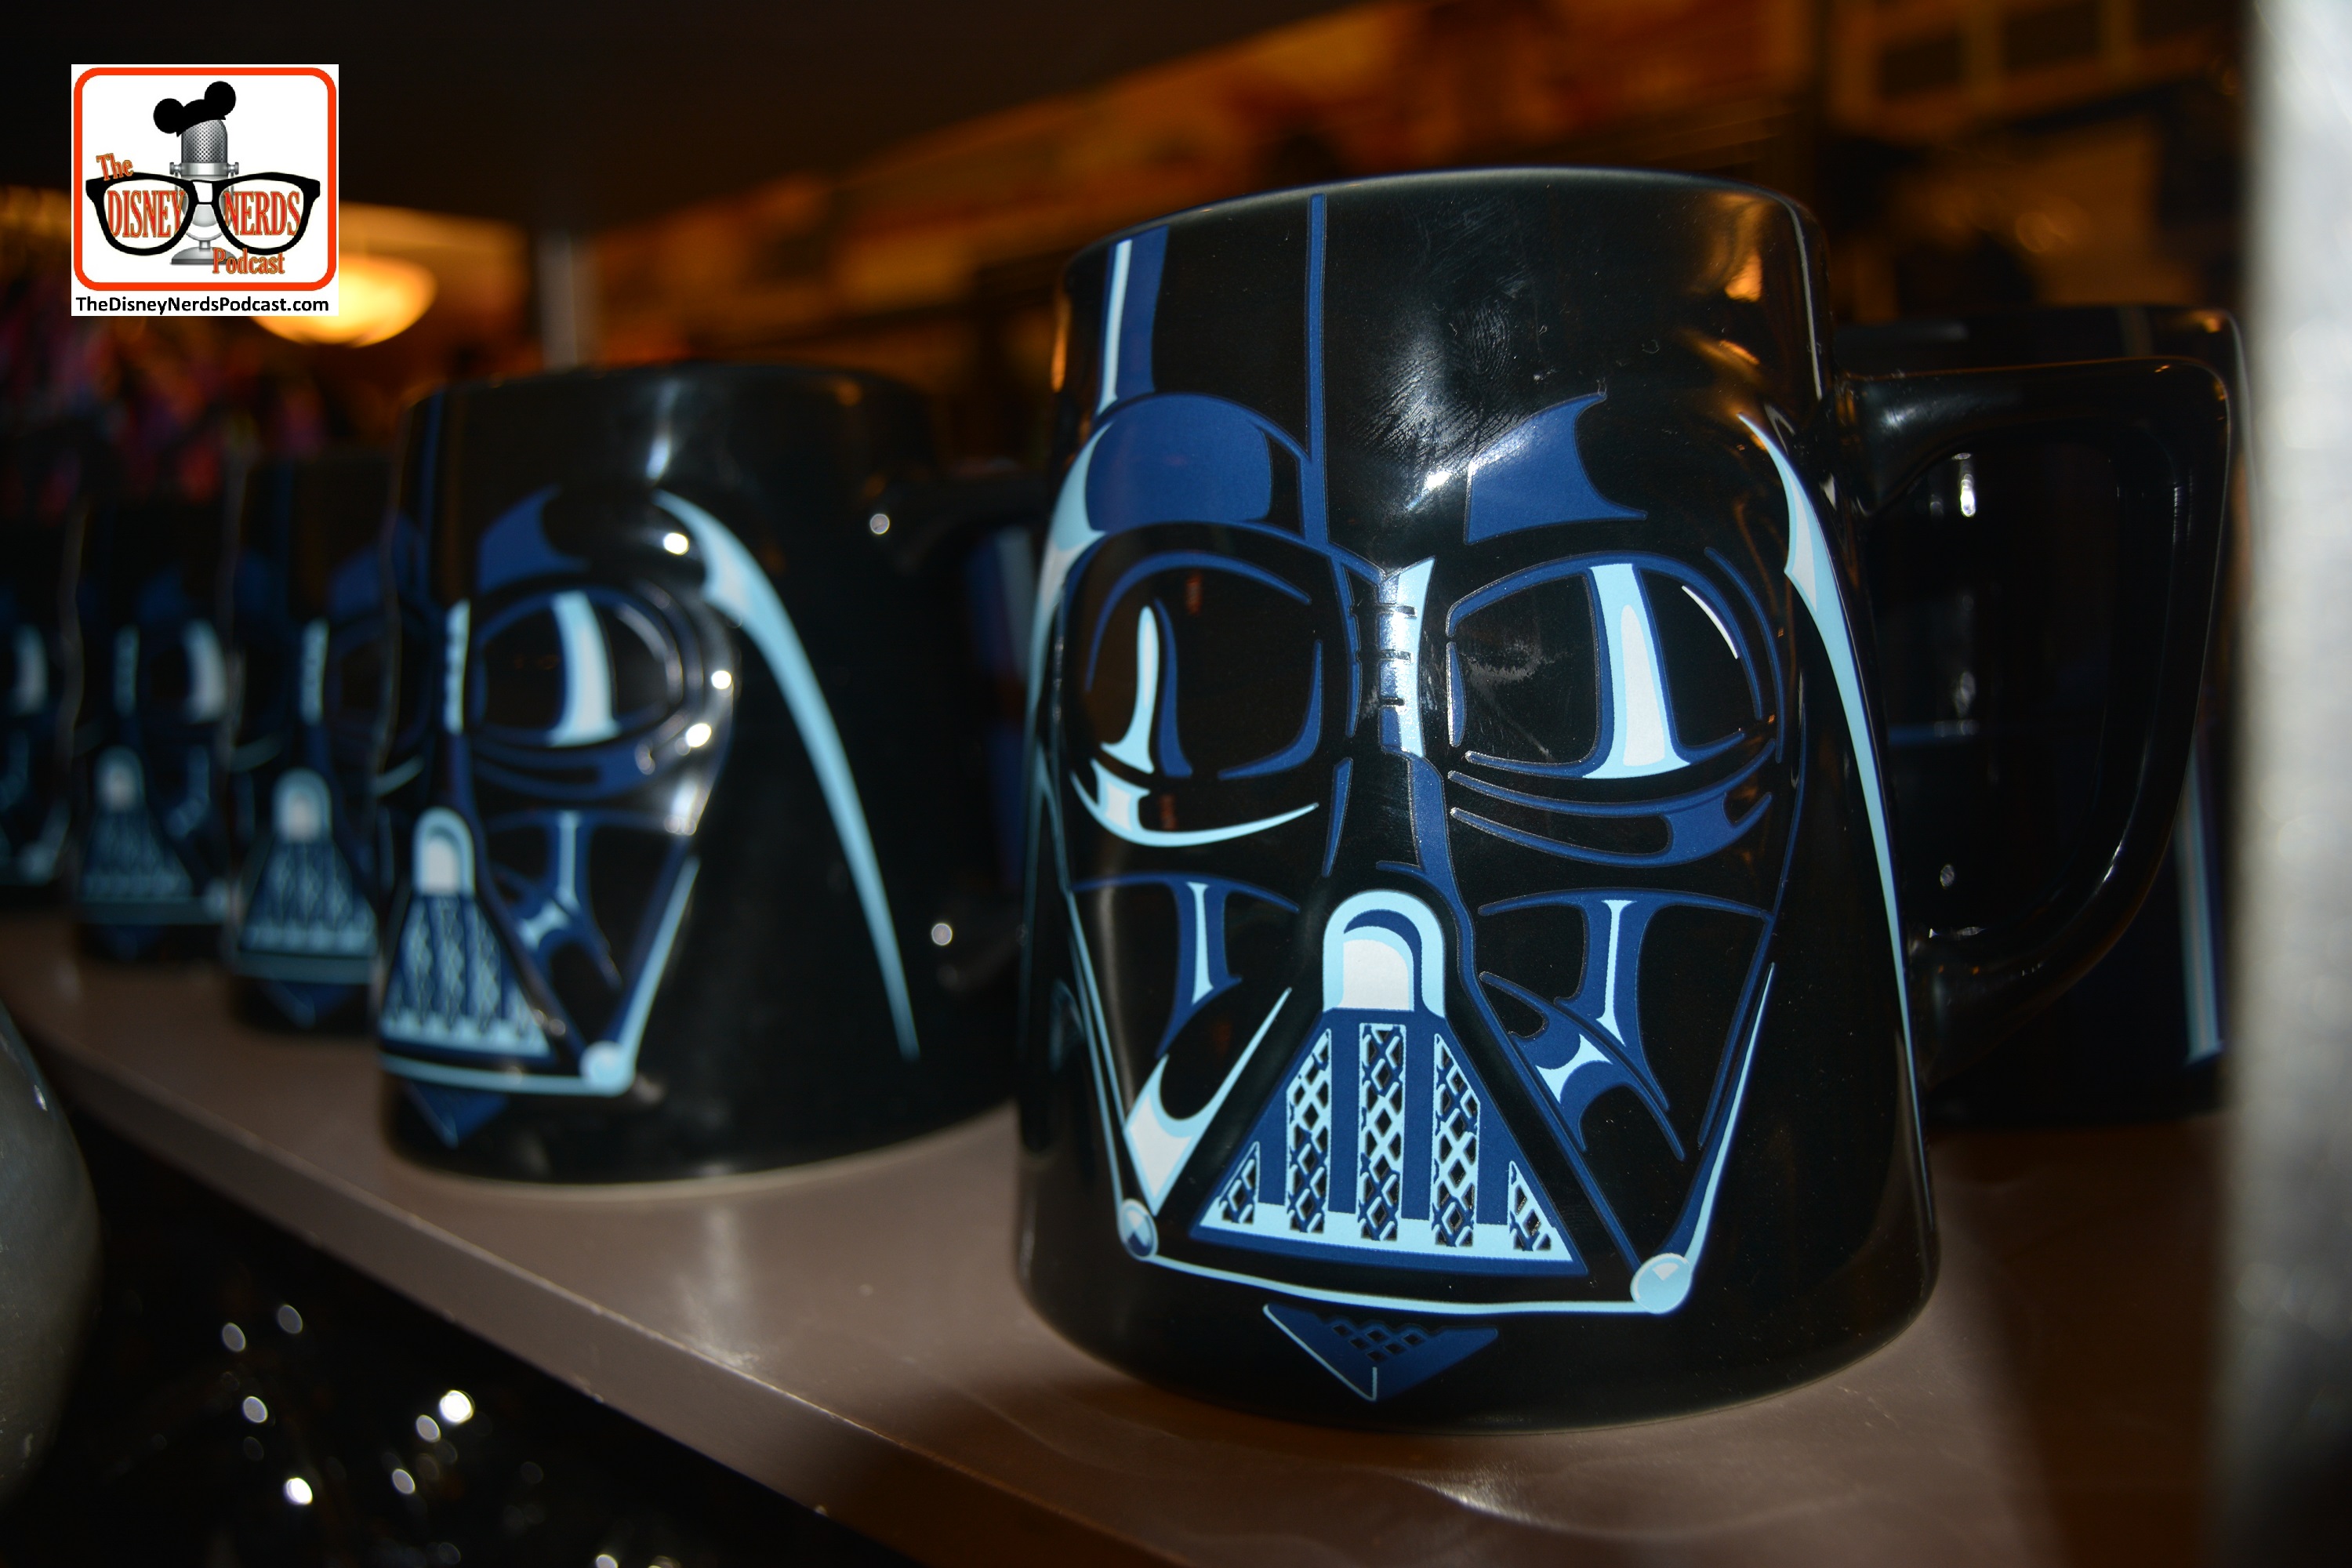 DNP April 2016 Photo Report: The "Everything Frozen" Store is now "Everything Star Wars"